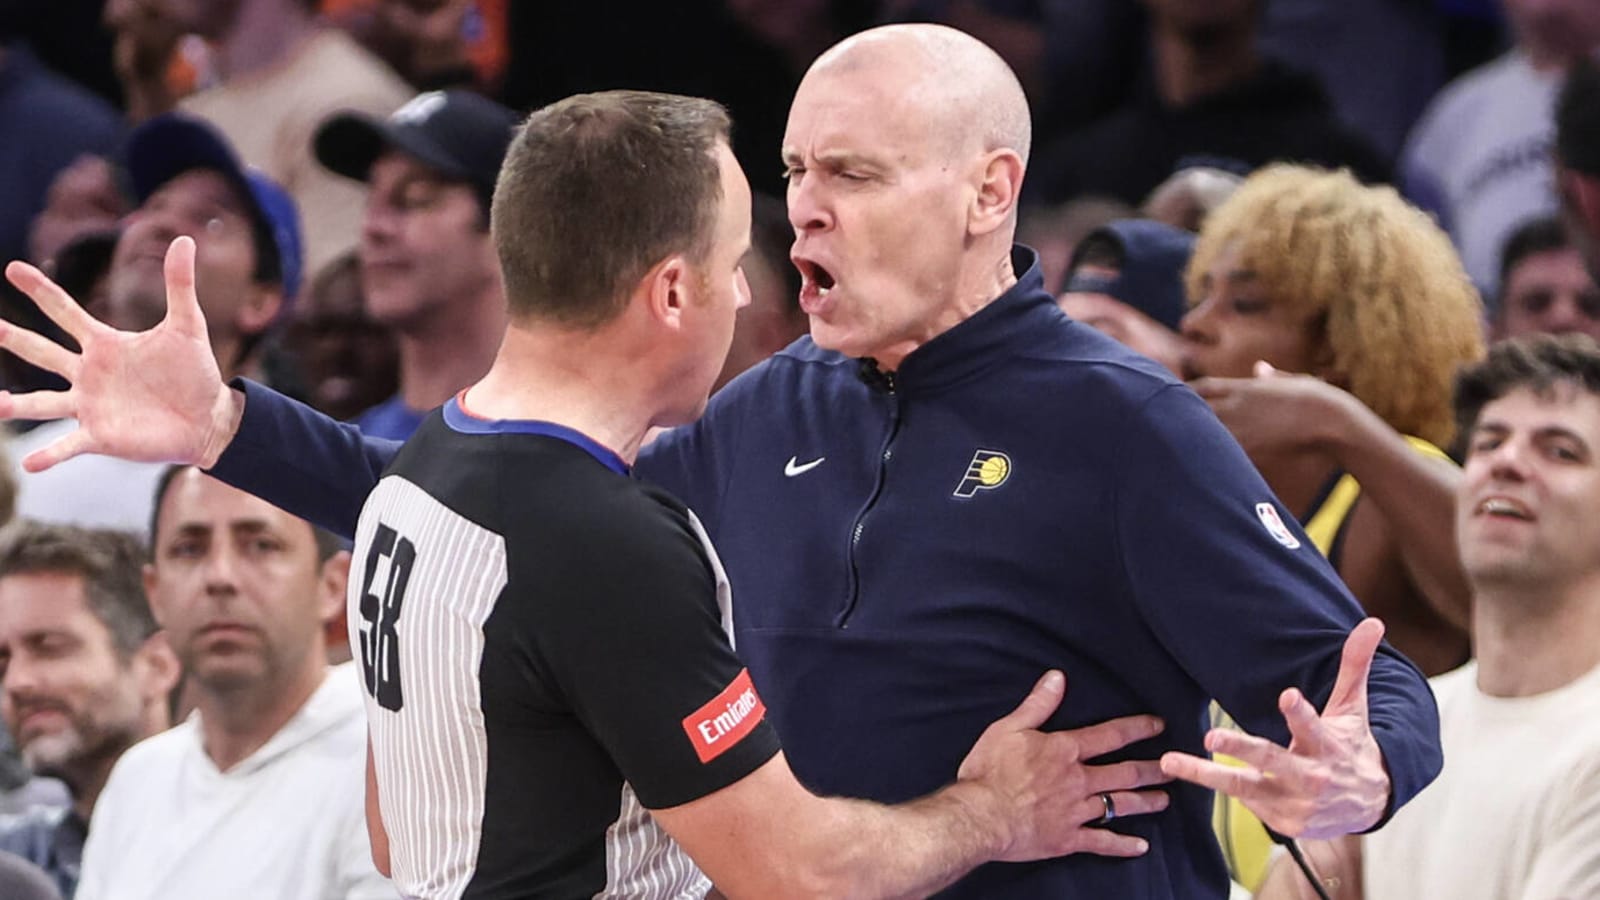 Watch: Rick Carlisle gets ejected from Game 2